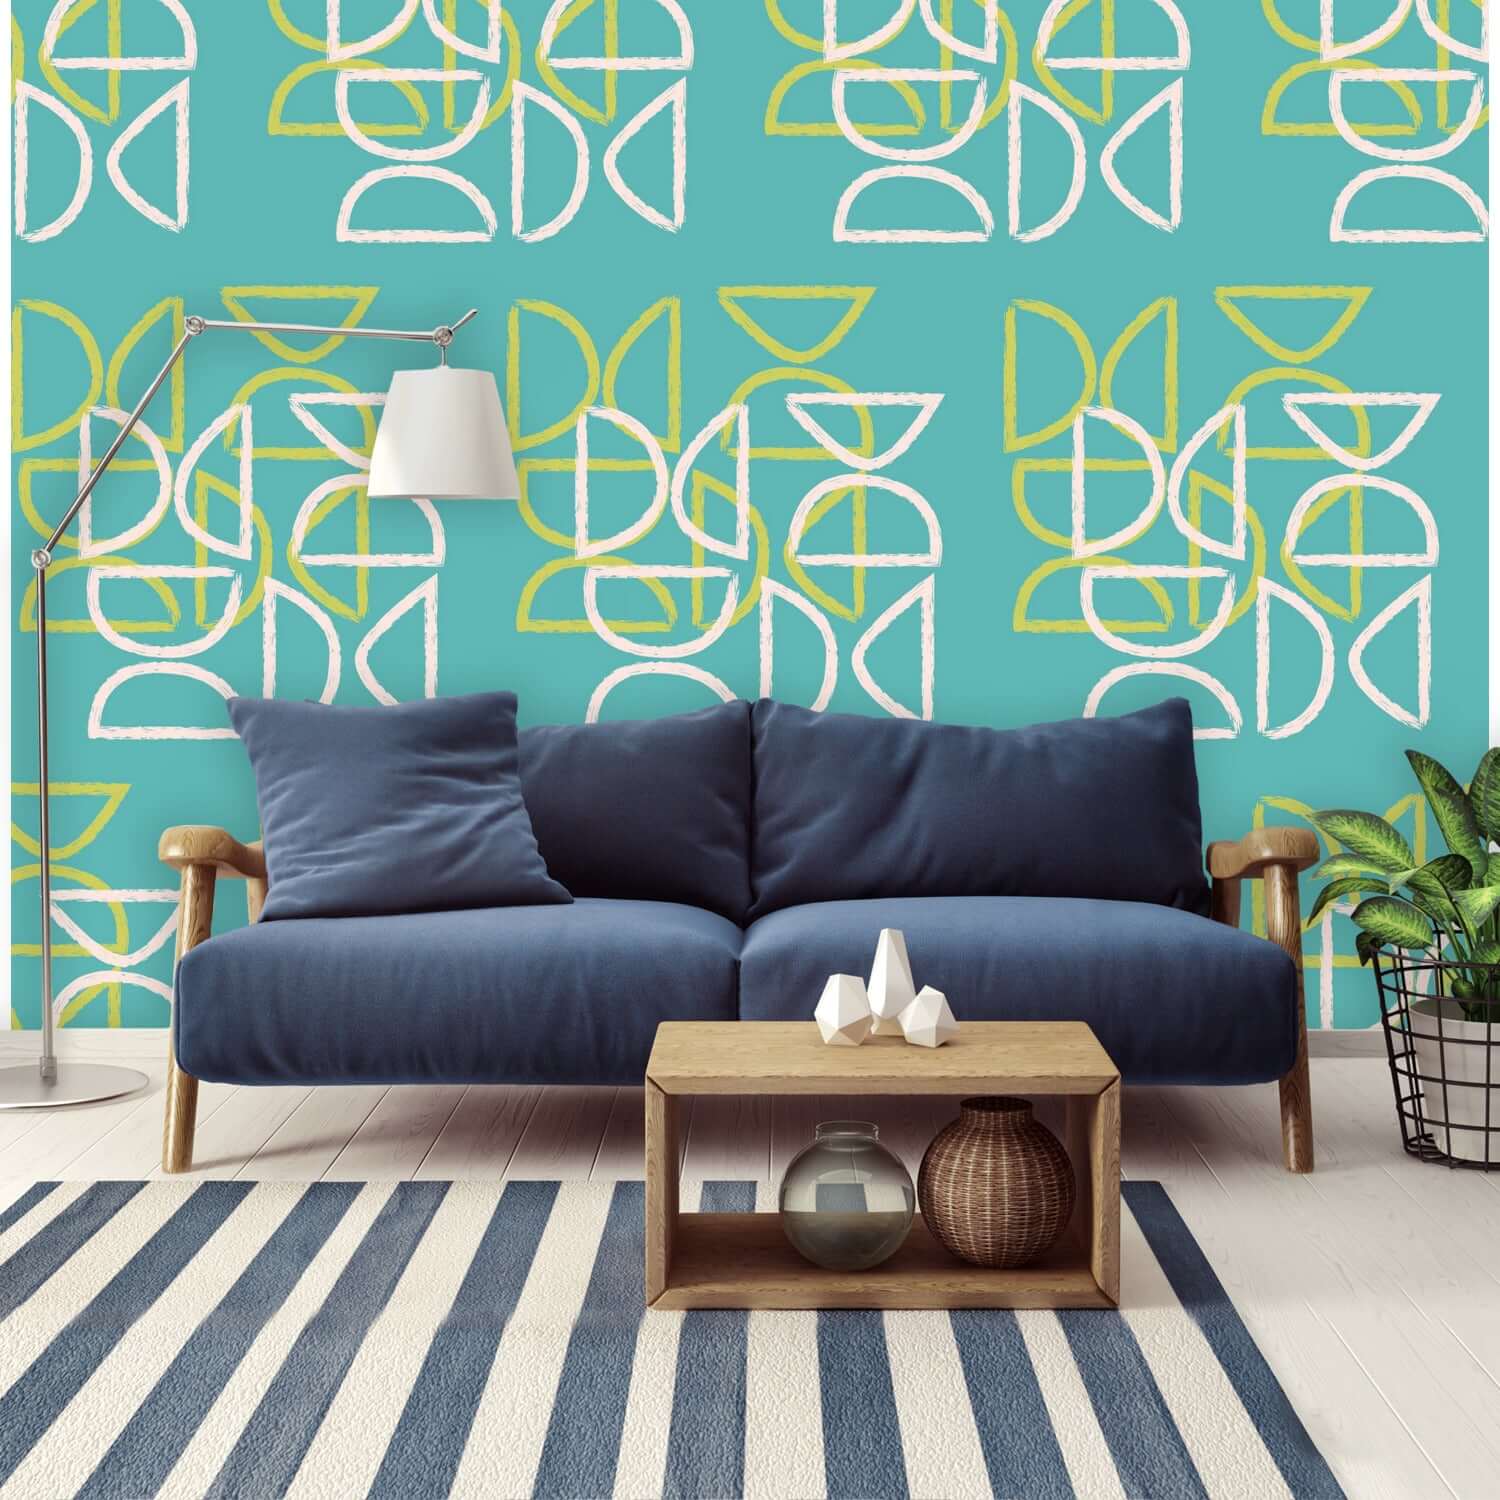 Tiki Wall Mural, Peel And Stick , Teal Blue,  Abstract, Mid Century Modern Wall Murals Wall Paper H96 x W140